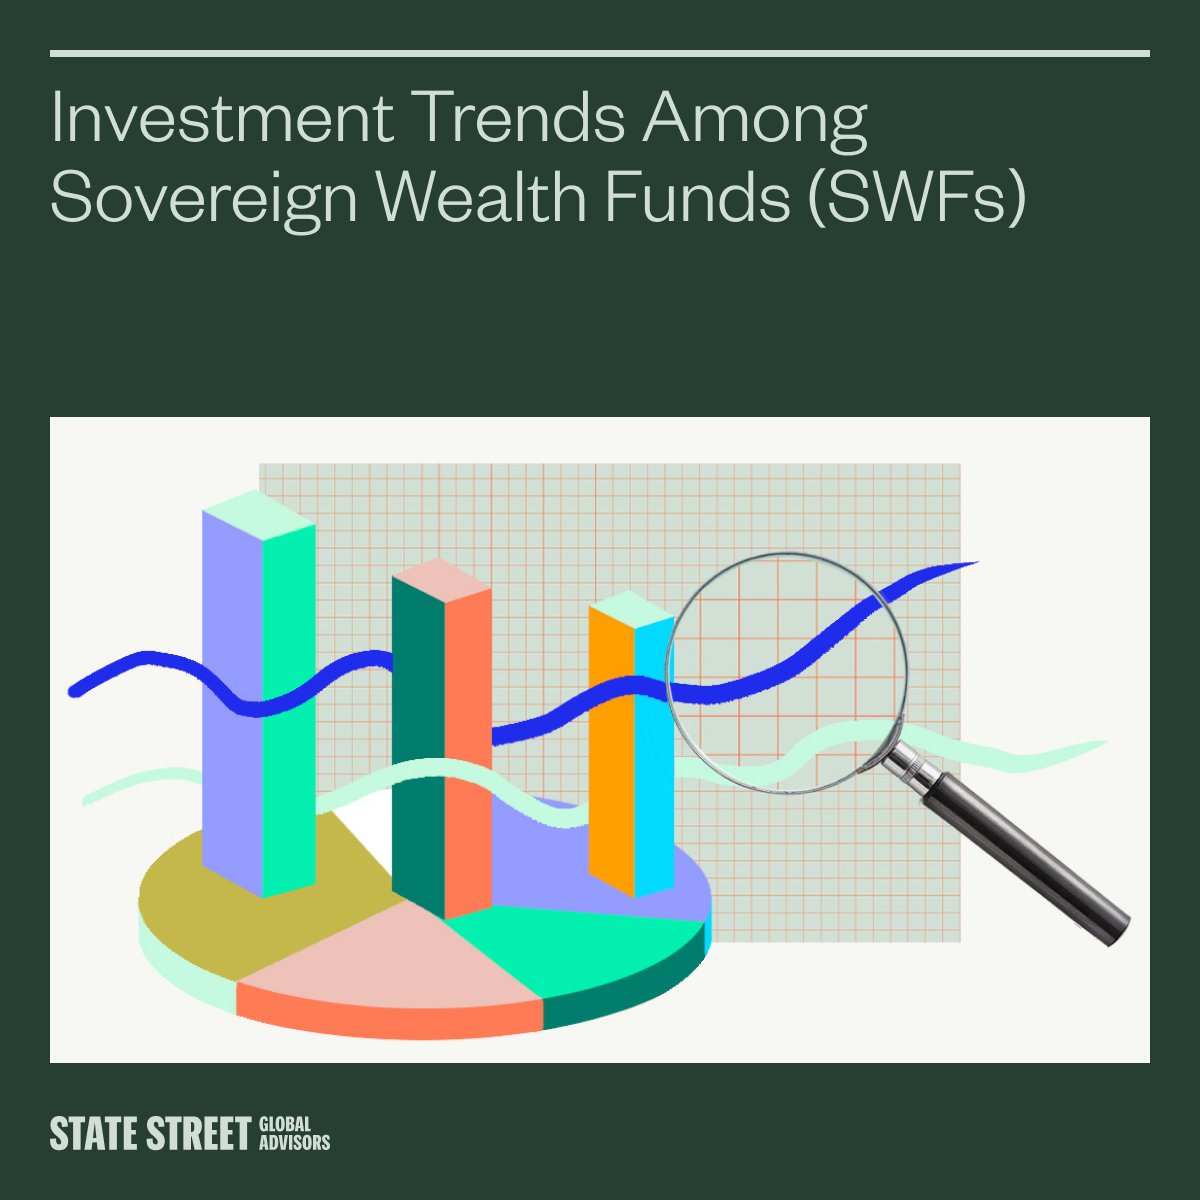 Elliot Hentov, PhD, Head of Macro Policy Research and Vladimir Gorshkov, CFA, Macro Policy Strategist, give us an update on the investing world of sovereign wealth funds in this biennial study. Read the full report here: ms.spr.ly/6016cwAxe #shareworthy